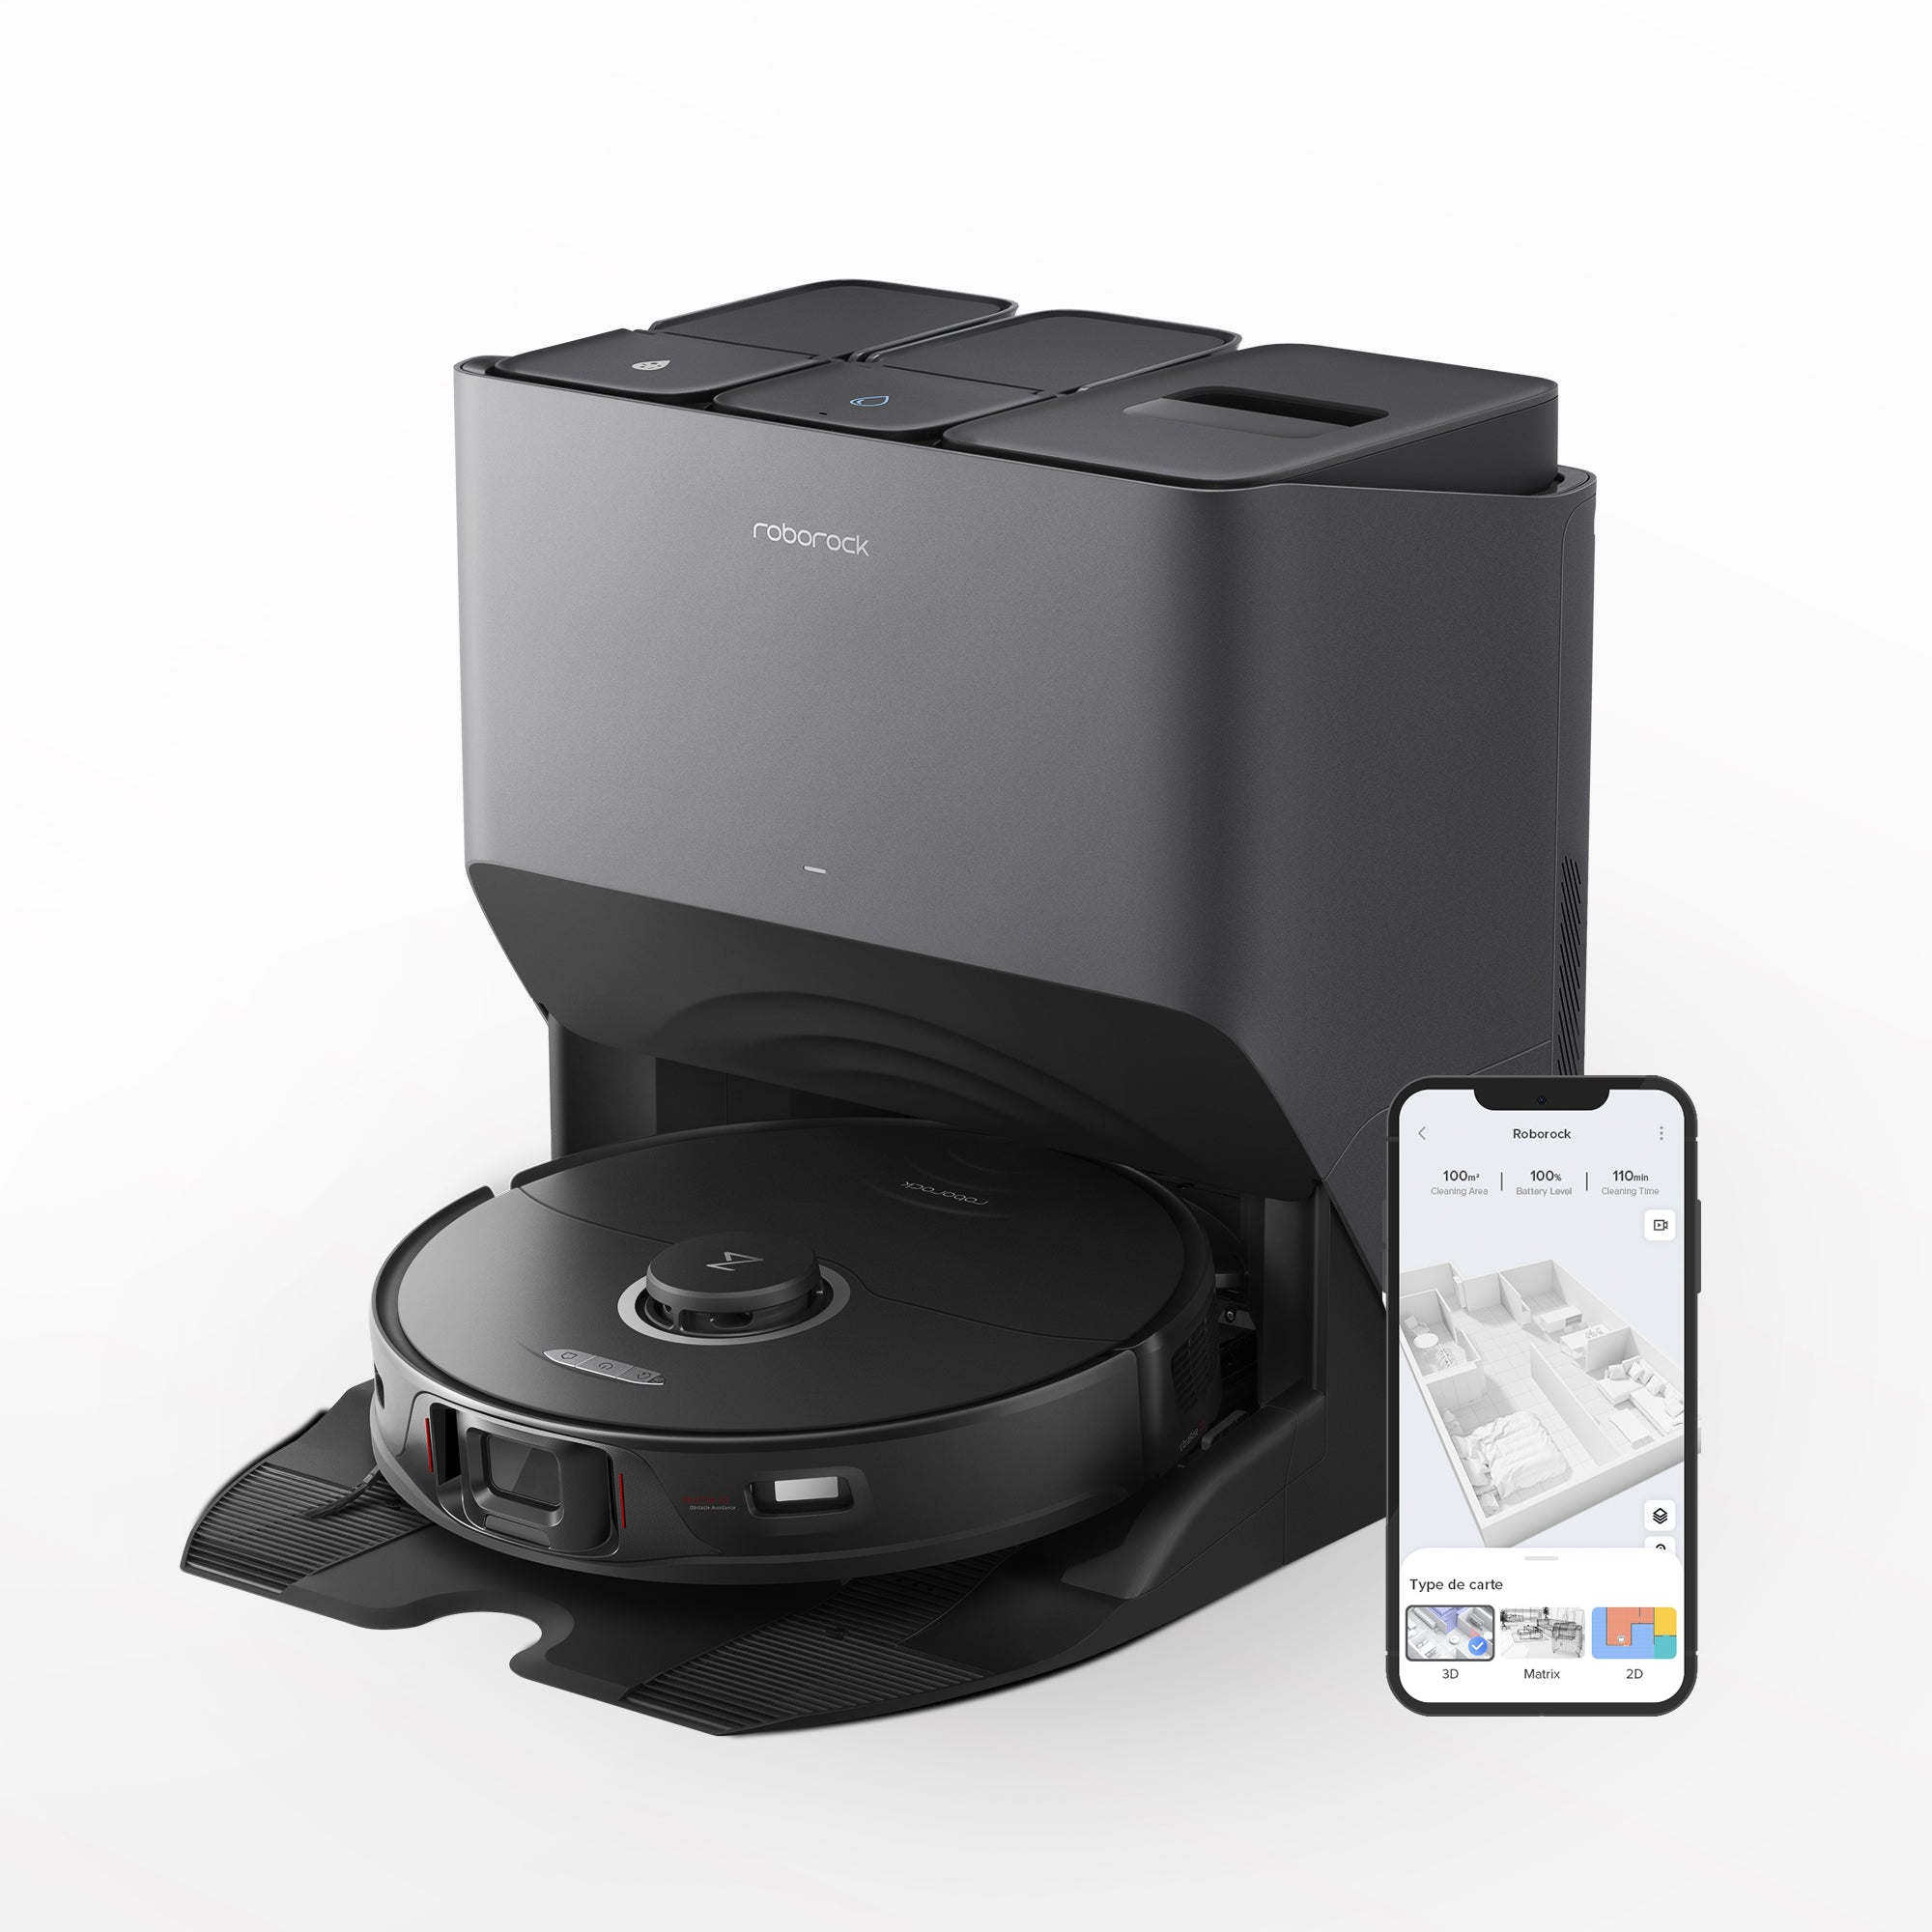 Roborock S7 MaxV Ultra Auto Charging Pet Robotic Vacuum and Mop Self  Emptying in the Robotic Vacuums department at